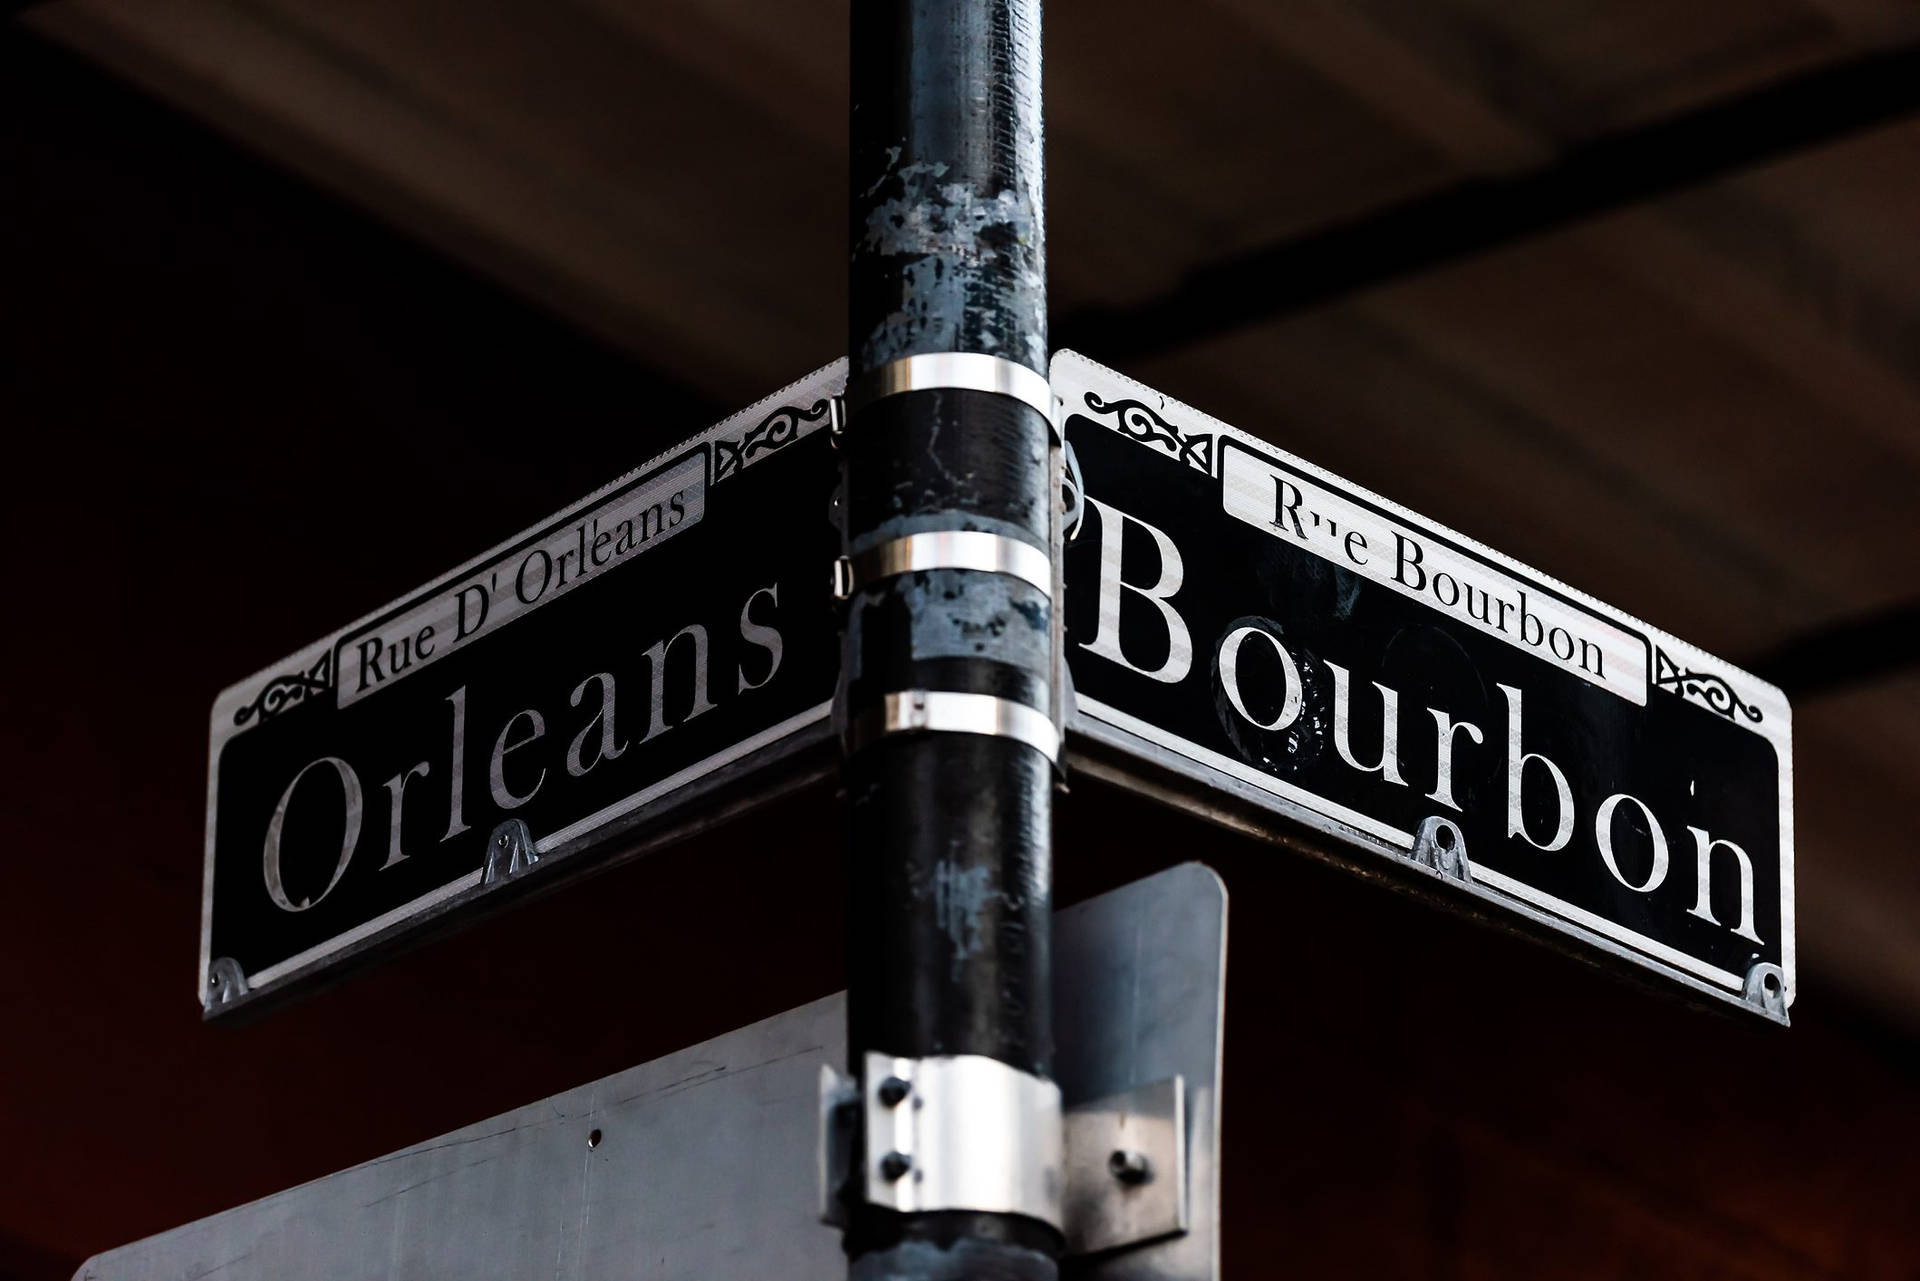 Orleans-bourbon New Orleans Intersection Street Sign Wallpaper